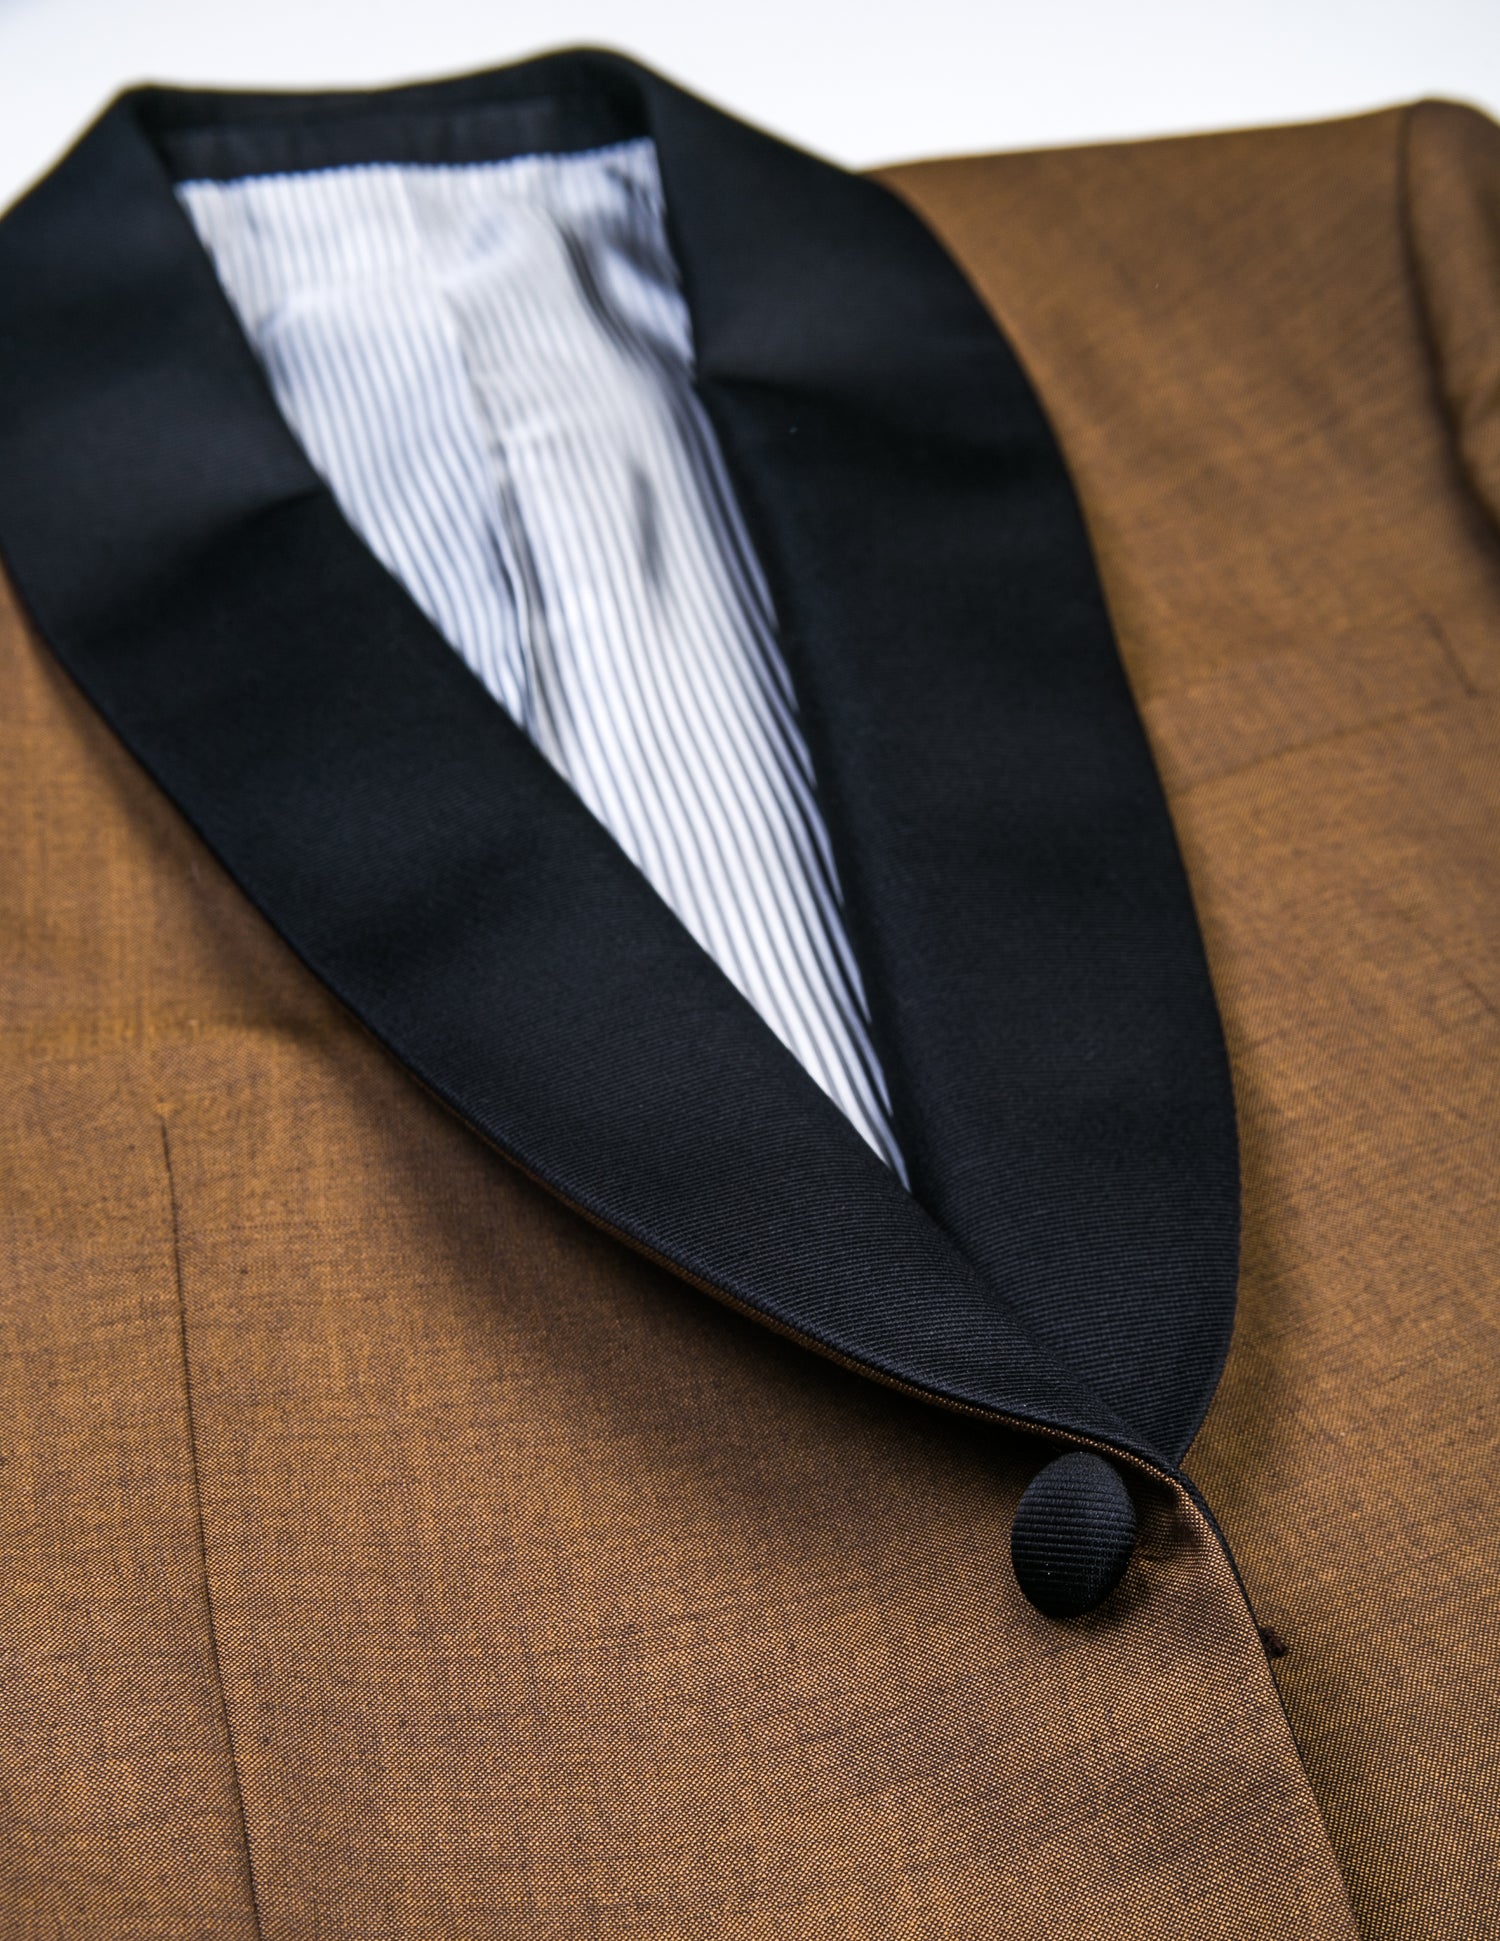 Detail of BKT50 Shawl Collar Dinner Jacket - Copper showing grosgrain lapel and covered buttons